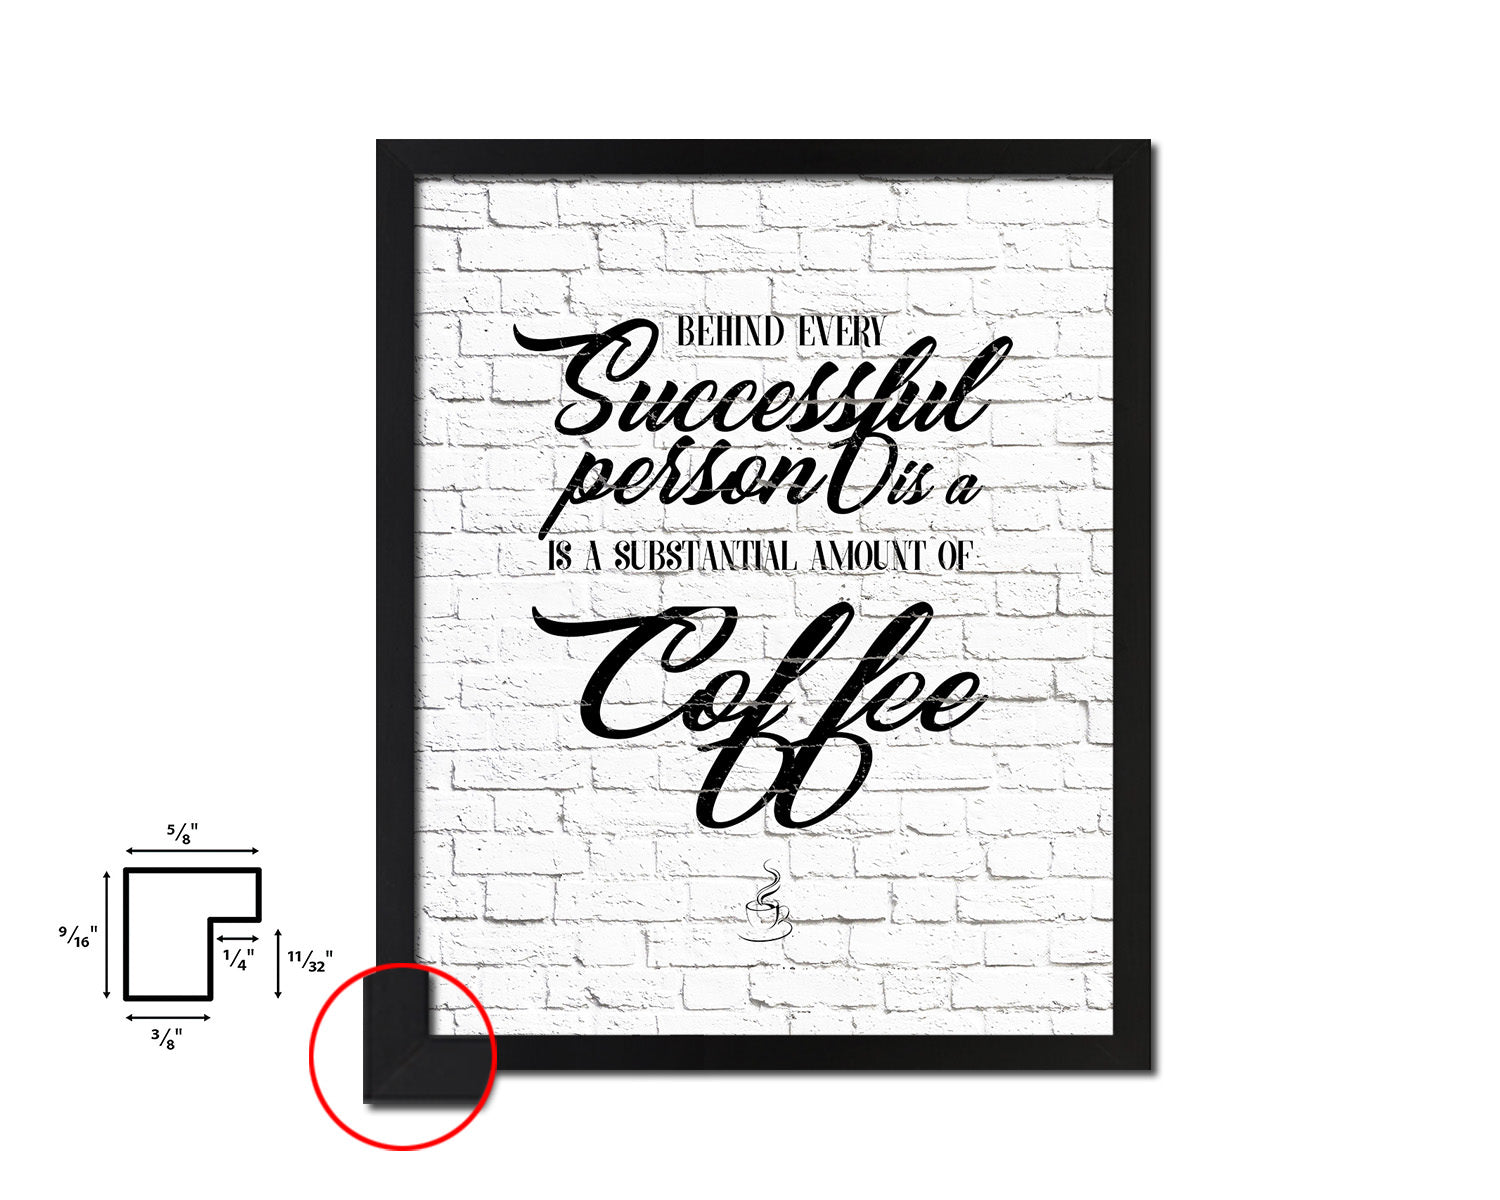 Behind every successful person is a substantial amount of coffee Quote Framed Artwork Print Wall Decor Art Gifts